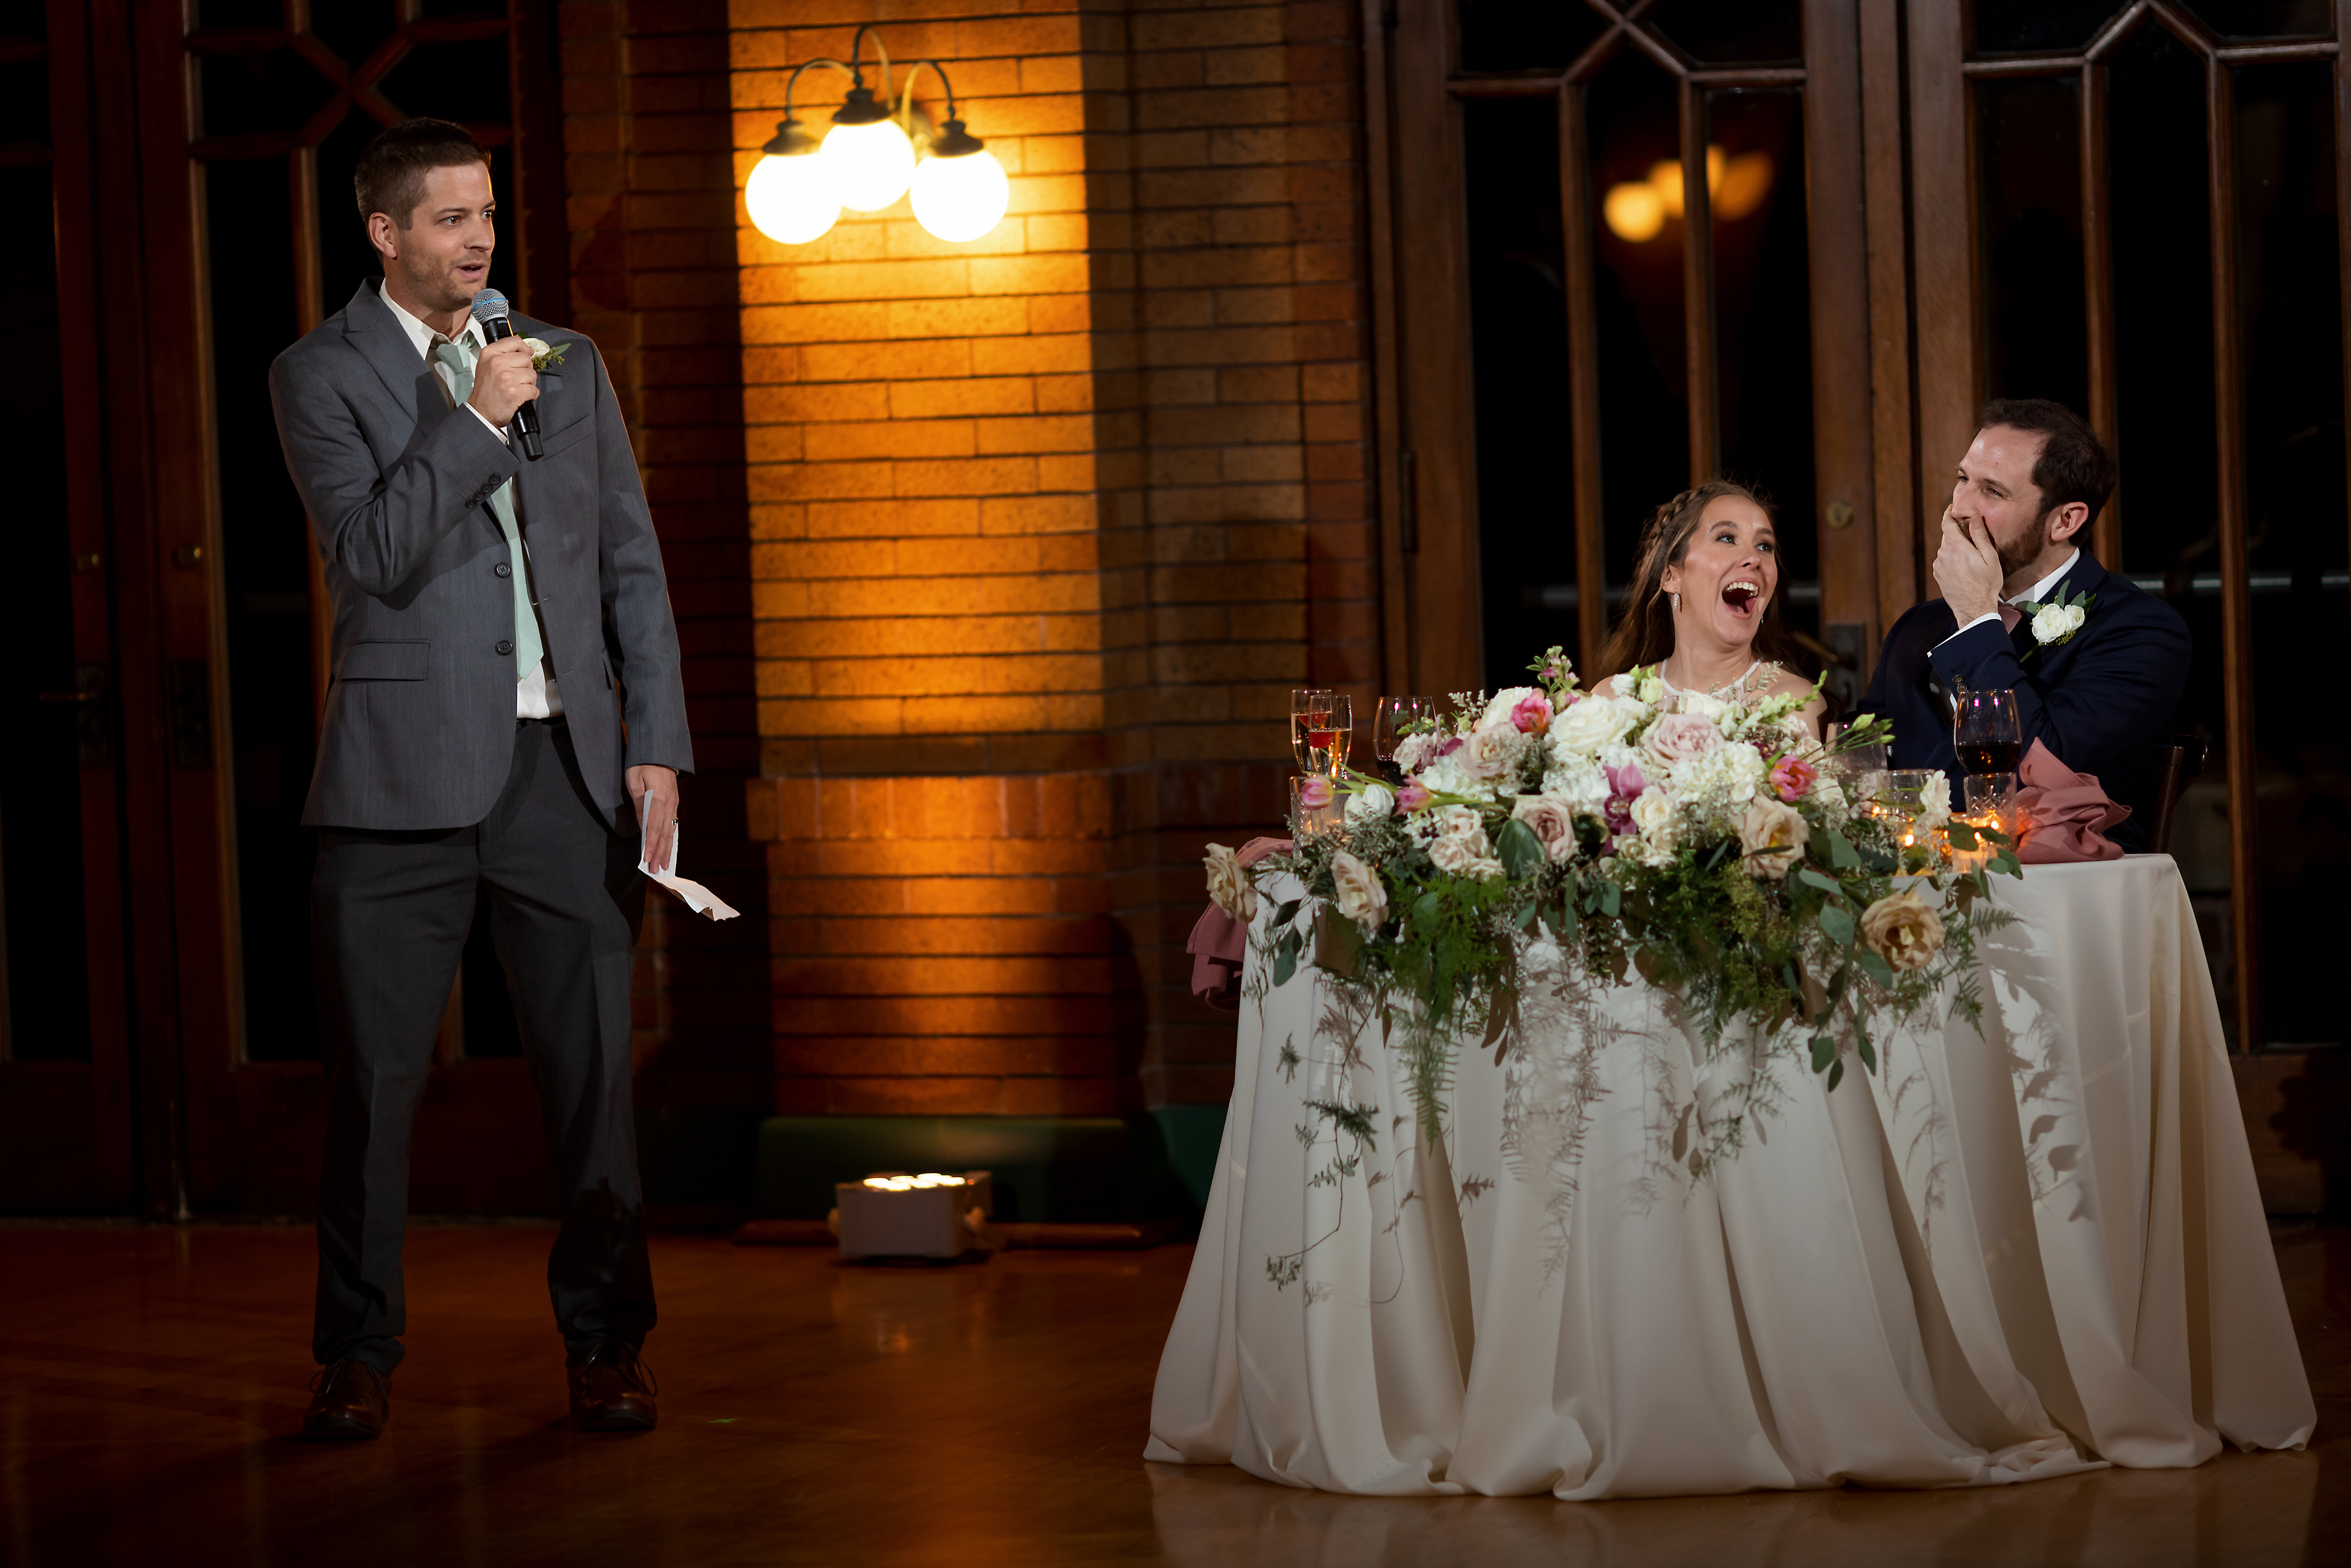 best man toast during wedding reception at Cafe Brauer in Chicago's Lincoln Park neighborhood